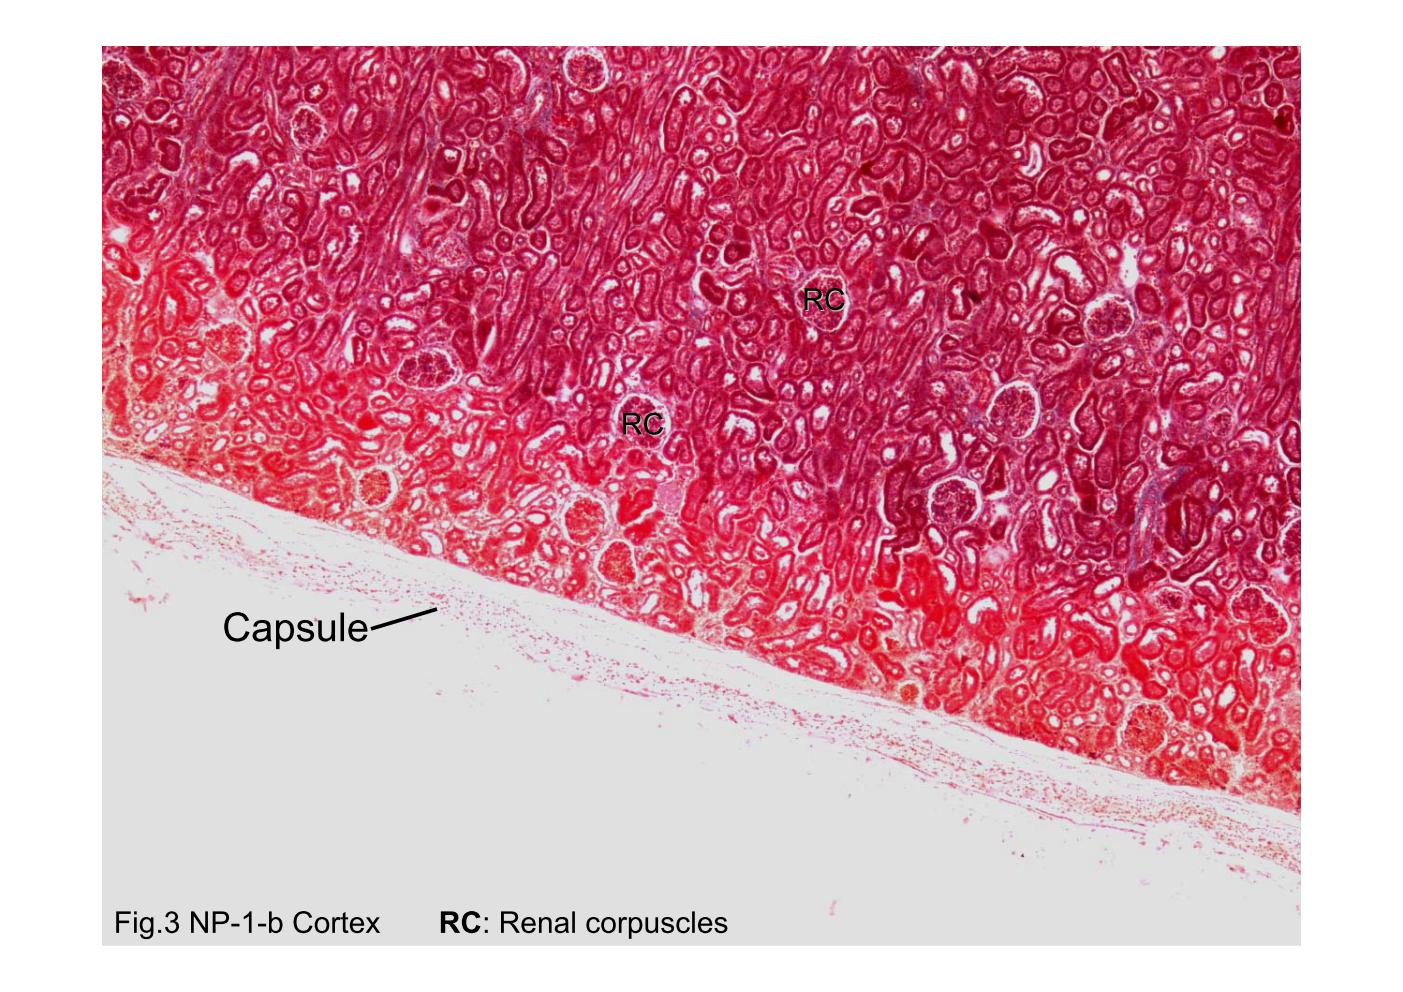 block8_06.jpg - Fig.3 Photomicrograph of kidney capsule. This photo-micrograph shows the capsule and part of the underlyingcortex. The capsule is composed of dense connective tissue,but its color faded away. The most distinctive feature of therenal cortex is the presence of the renal corpuscles (RC).